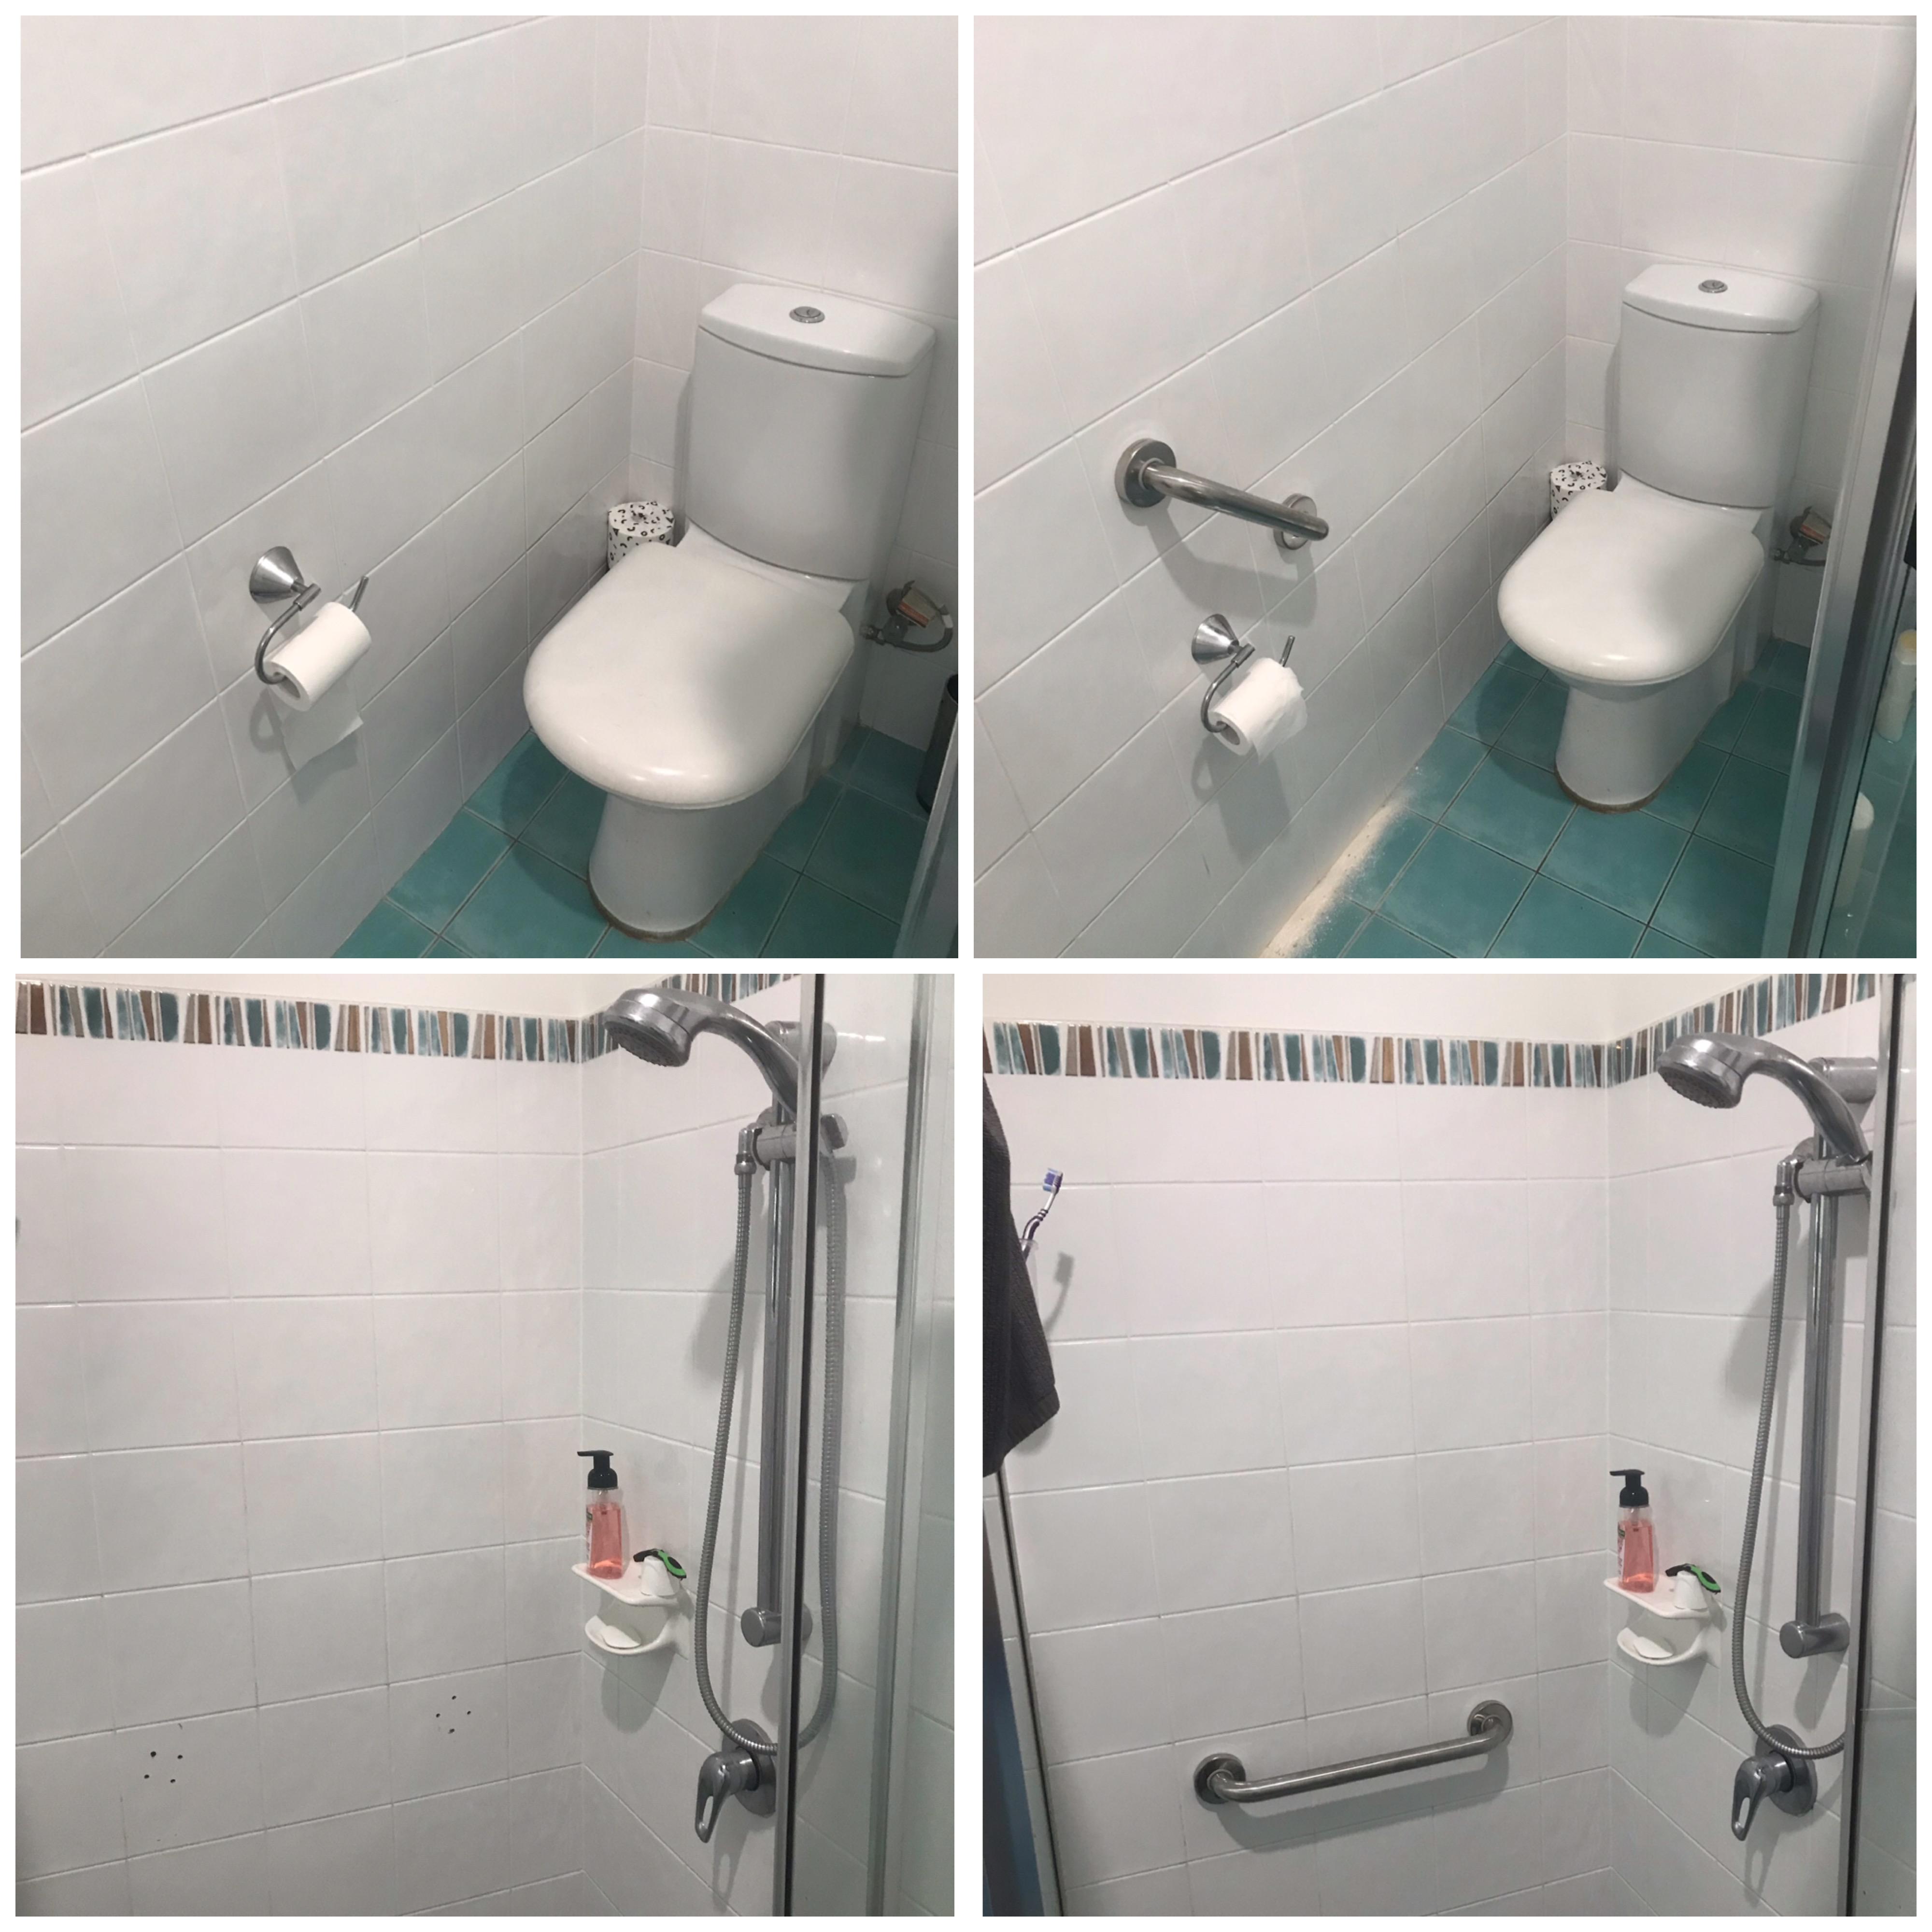 ACCESSIBILITY GRAB RAIL INSTALLATIONS CRUCIAL Plumbing Services Pty Ltd Seven Hills (02) 8041 4999